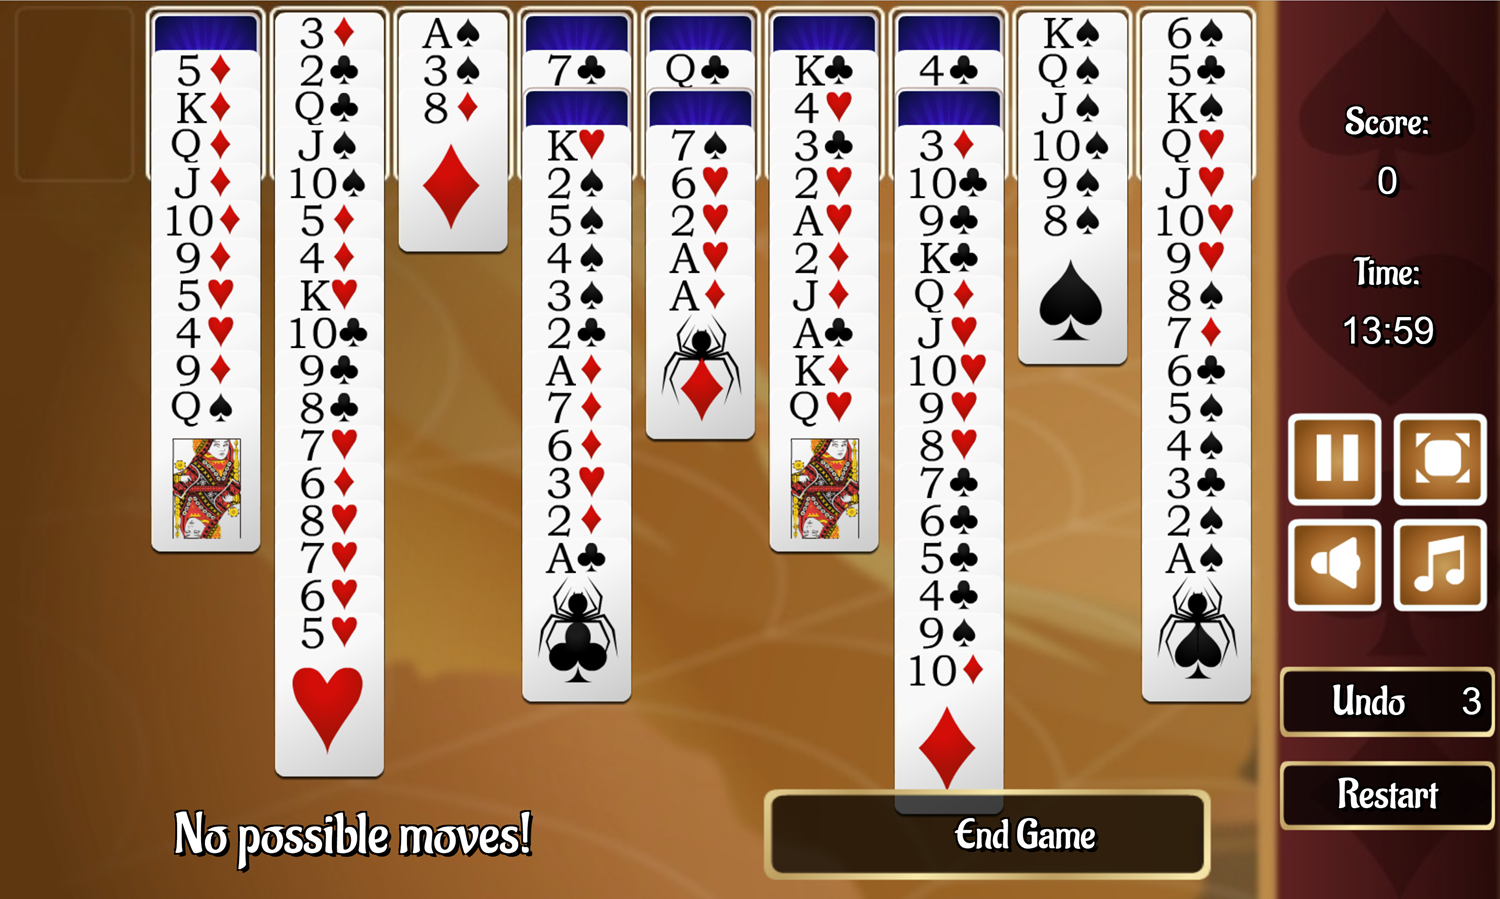 Jumping Spider Solitaire Game No Possible Moves Screenshot.